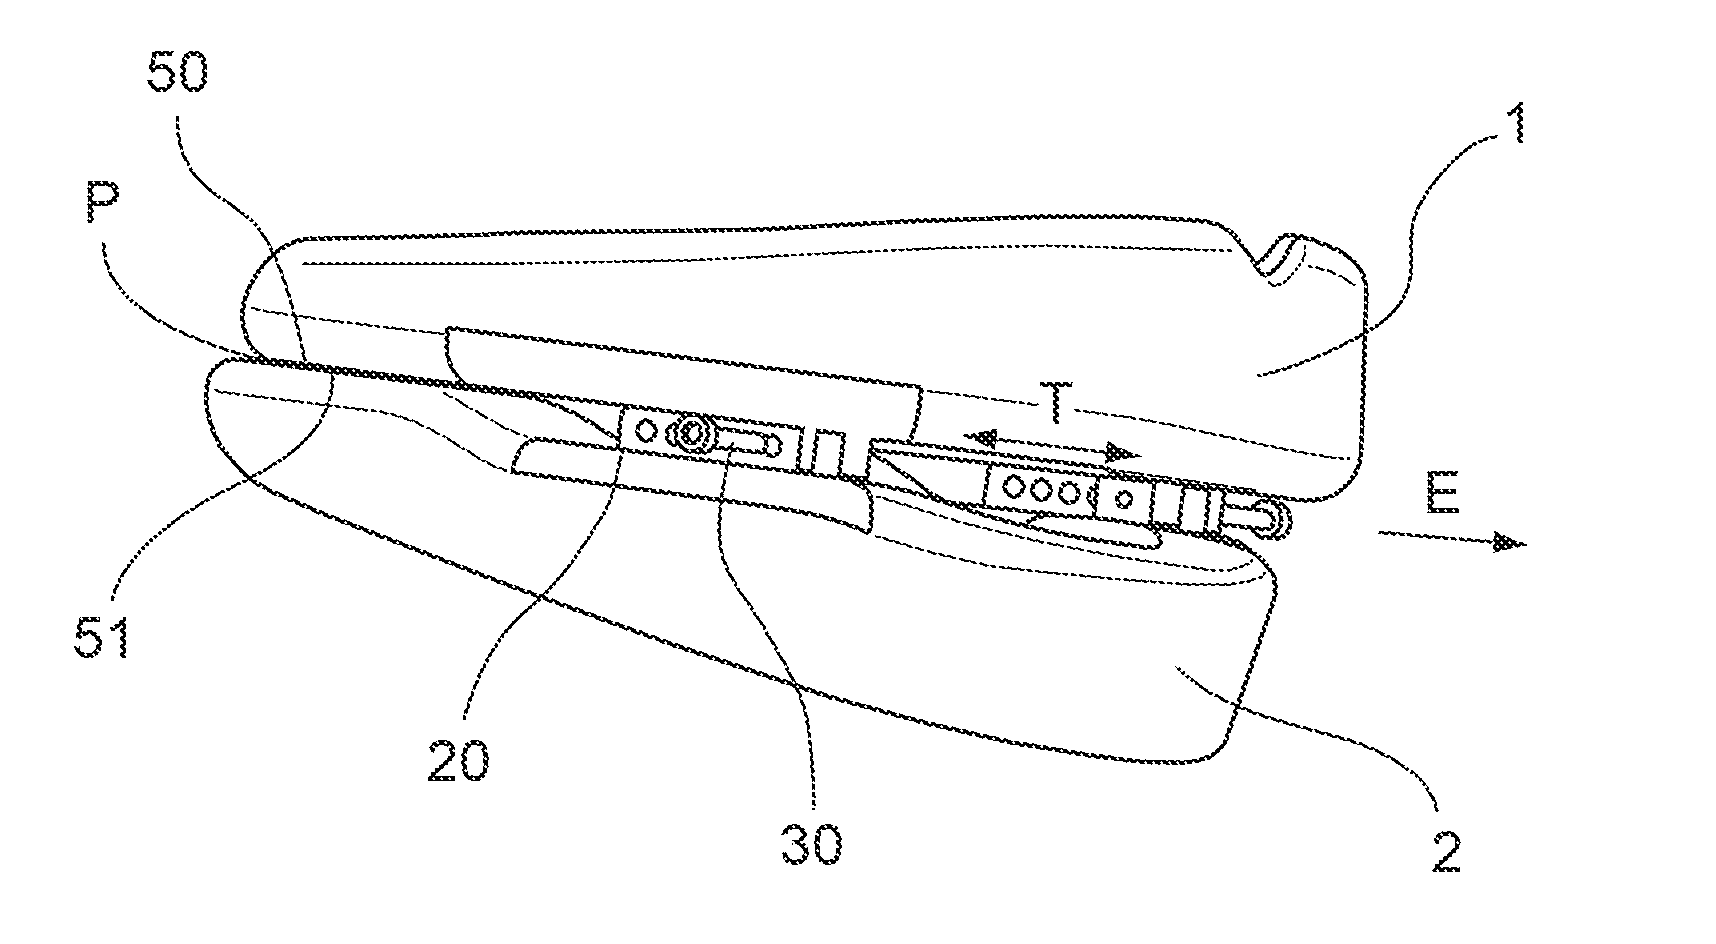 Orthosis comprising an upper tray and a lower tray, and connection with adjustable positioning